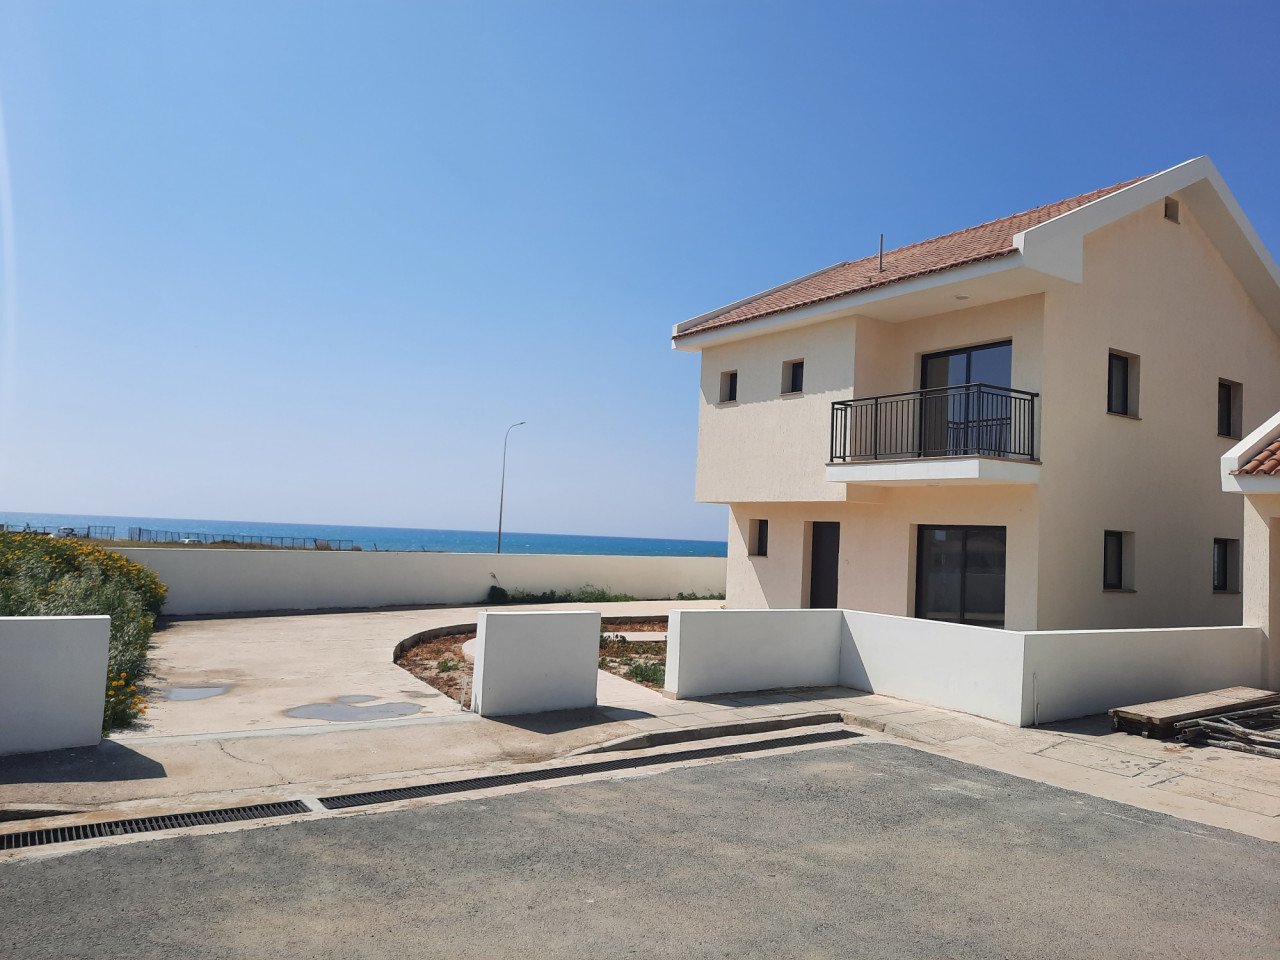 Property for Sale: Investment (Residential) in Pervolia, Larnaca  | Key Realtor Cyprus